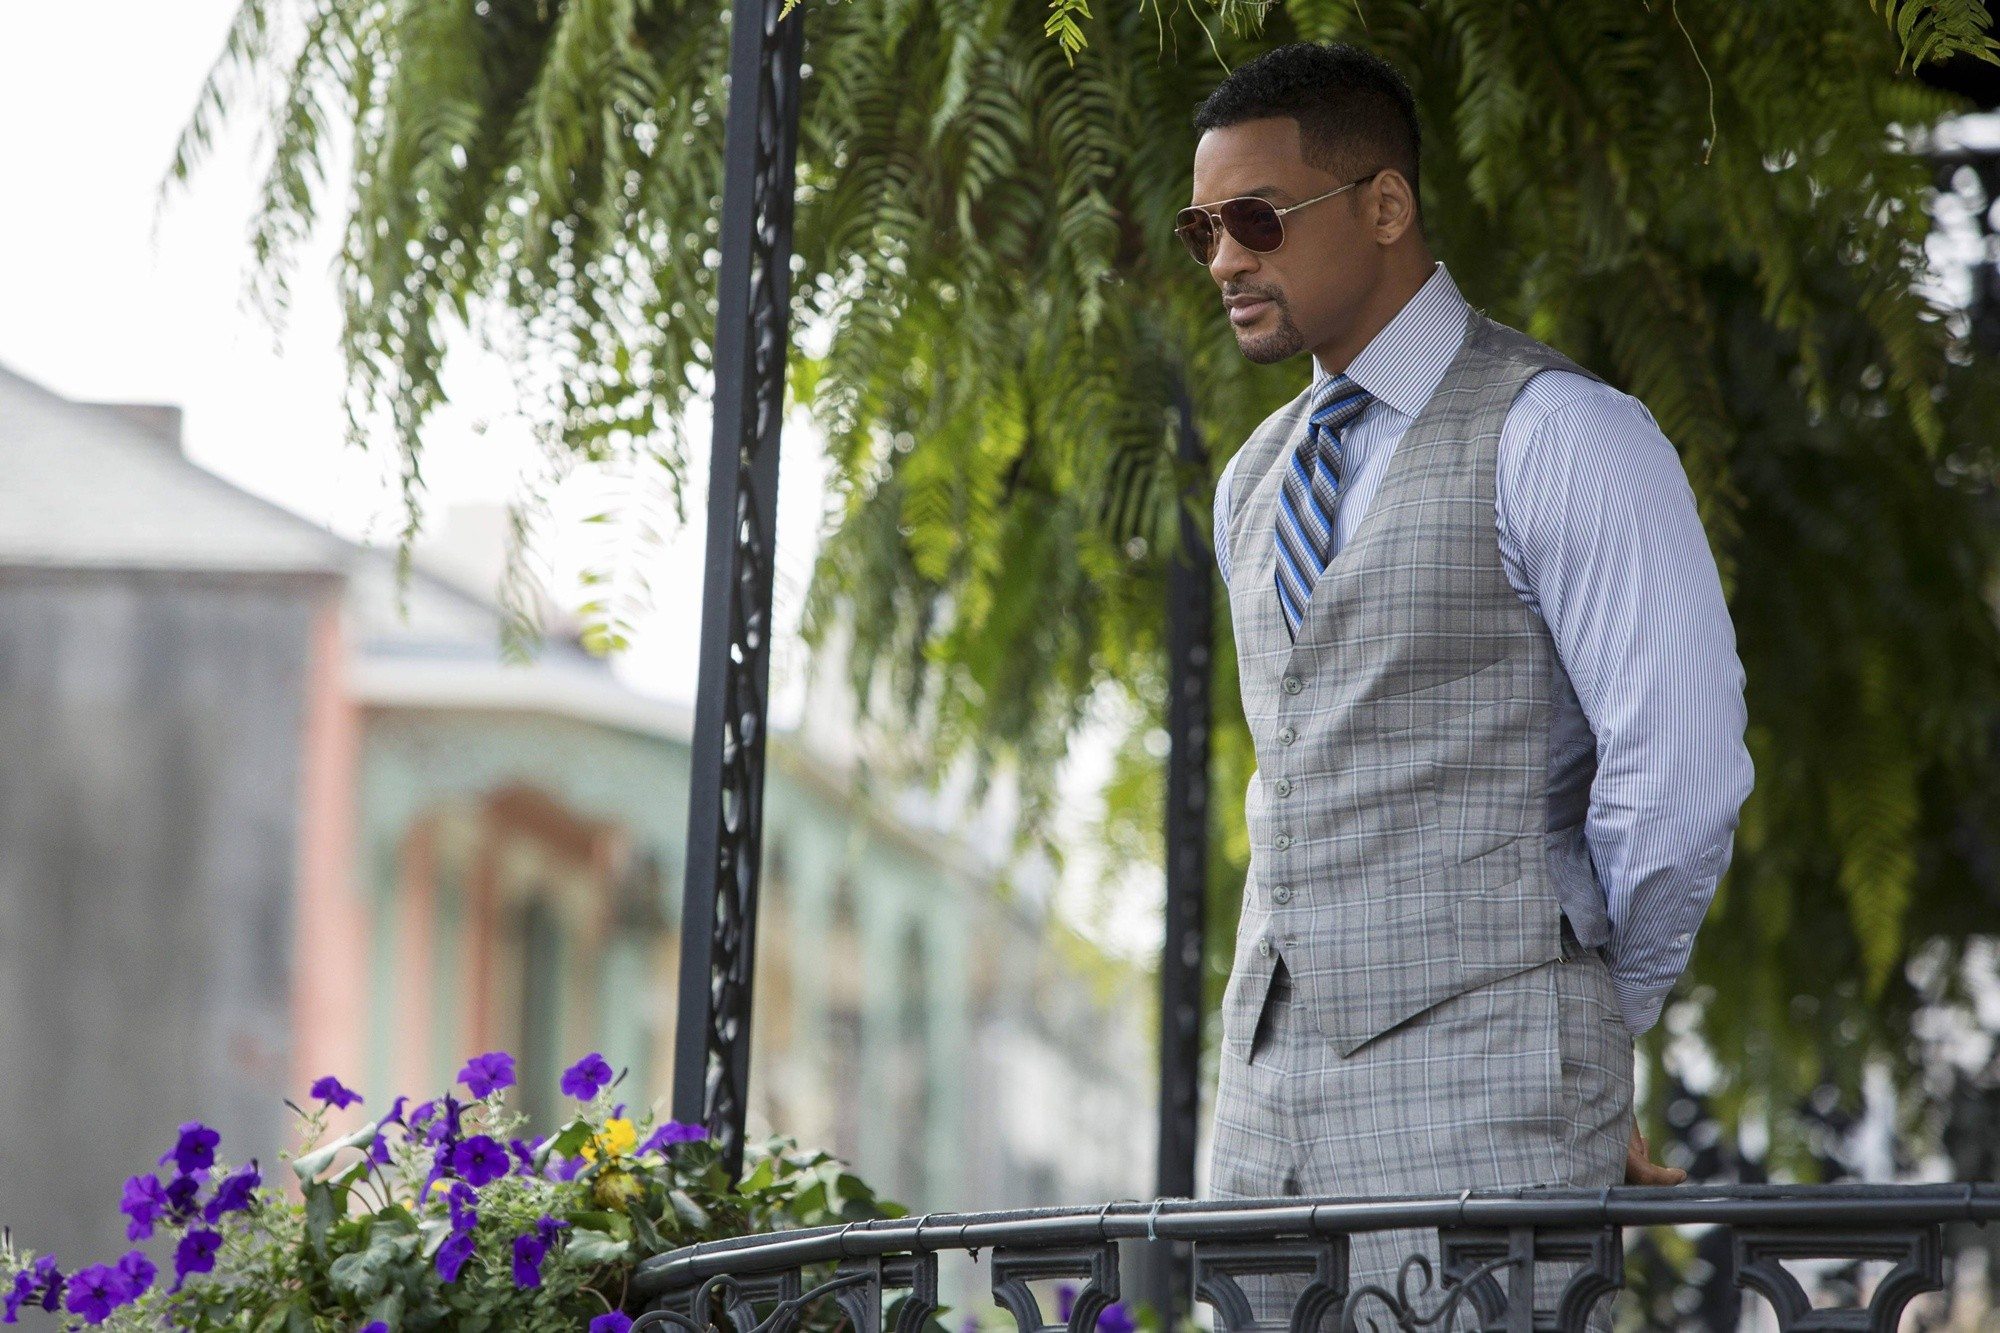 Will Smith stars as Nicky in Warner Bros. Pictures' Focus (2015)